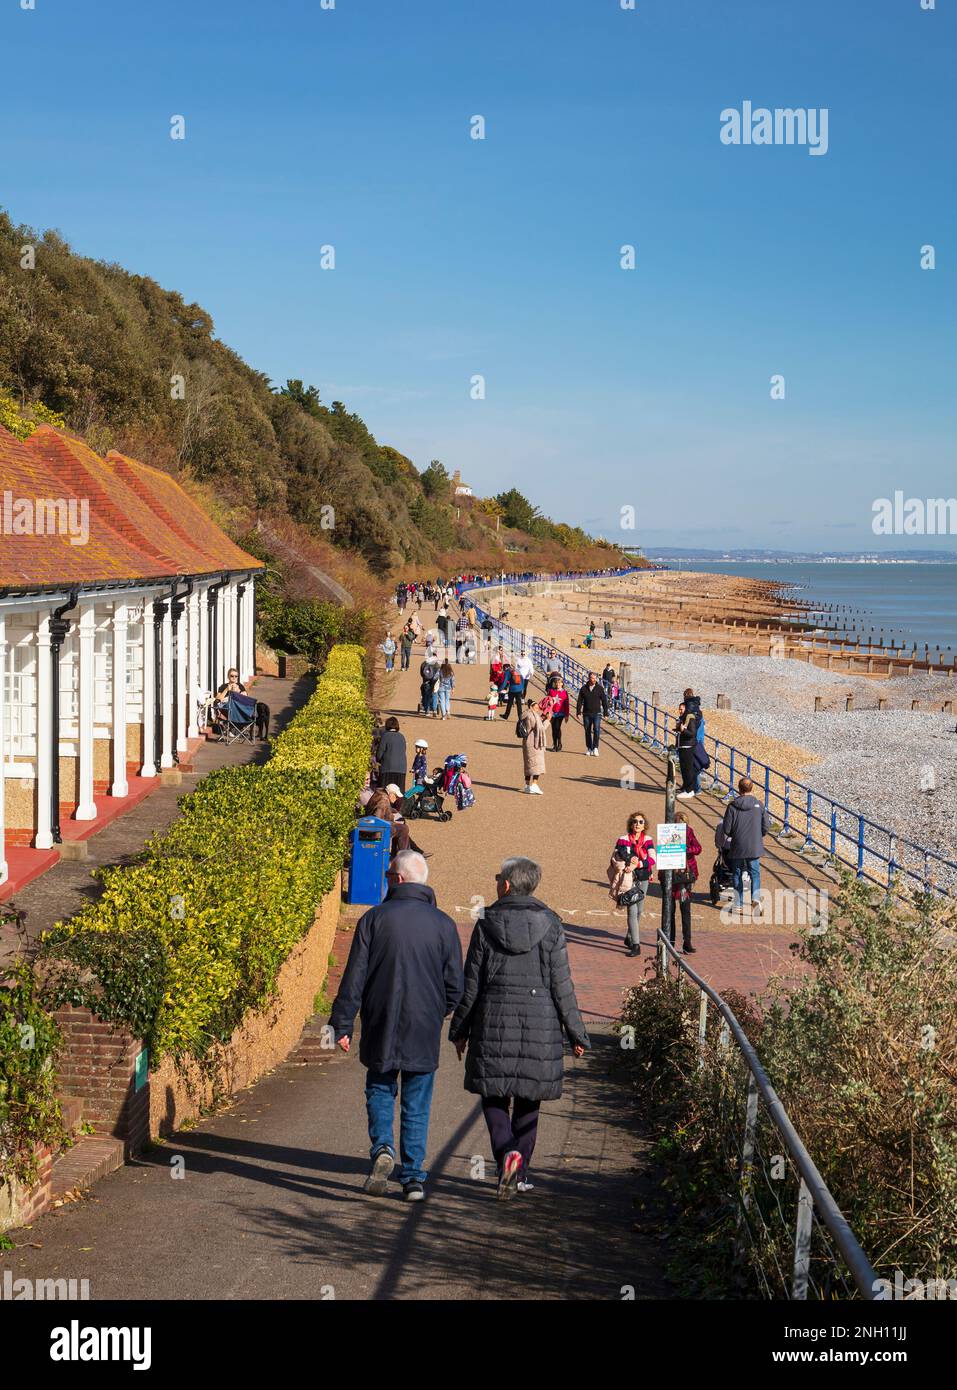 Eastbourne seafront Promenade, Holywell. Stock Photo